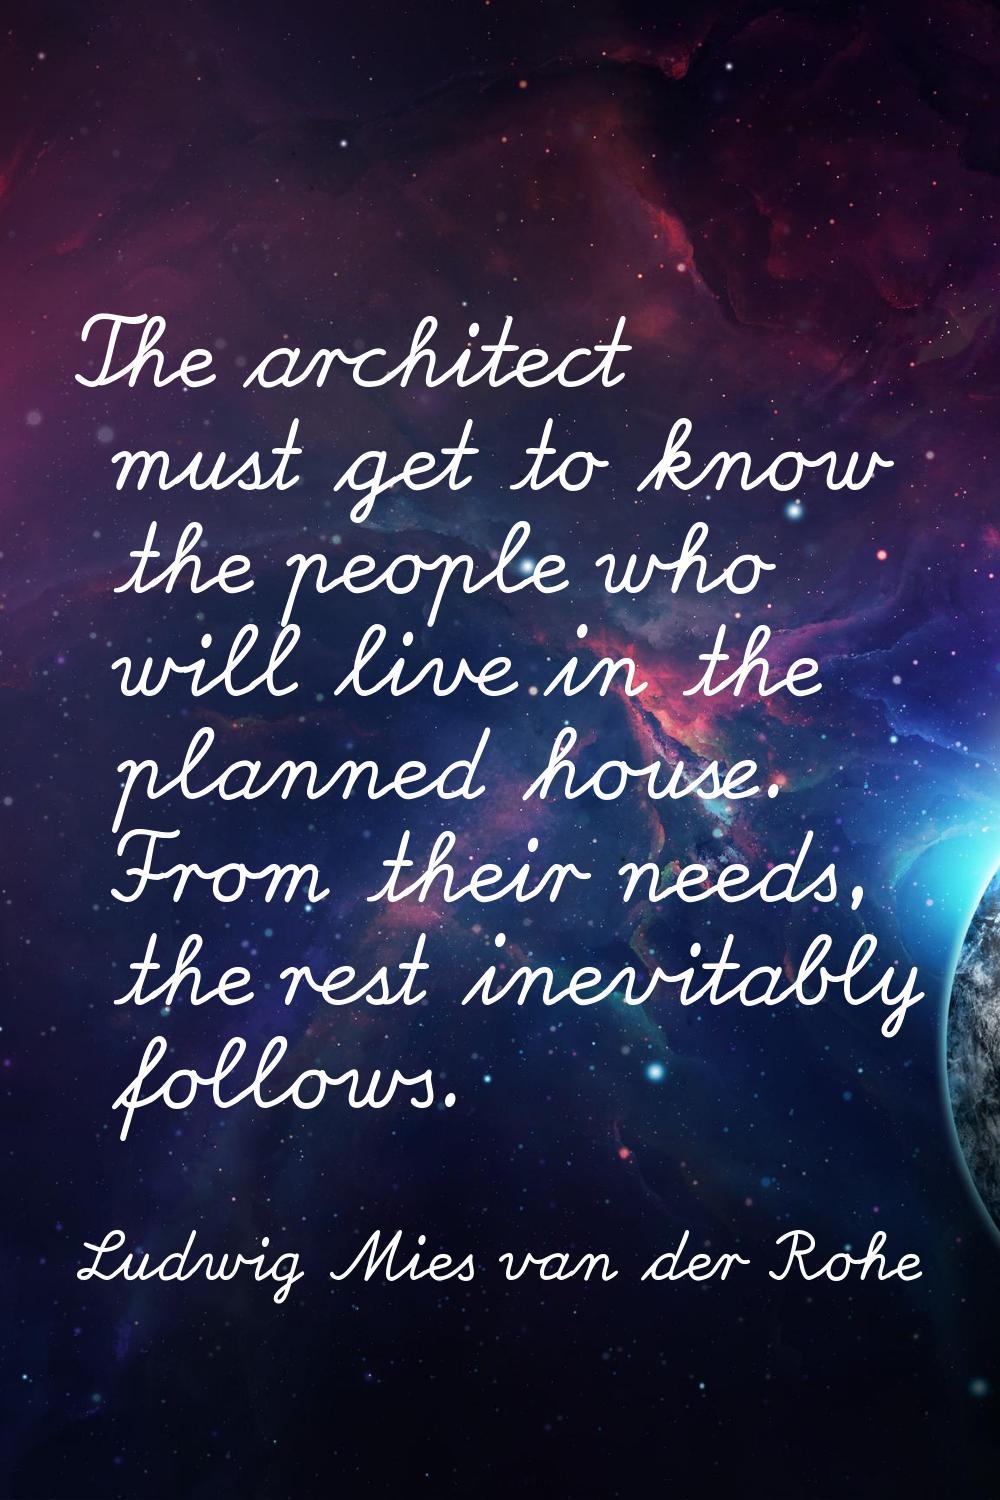 The architect must get to know the people who will live in the planned house. From their needs, the